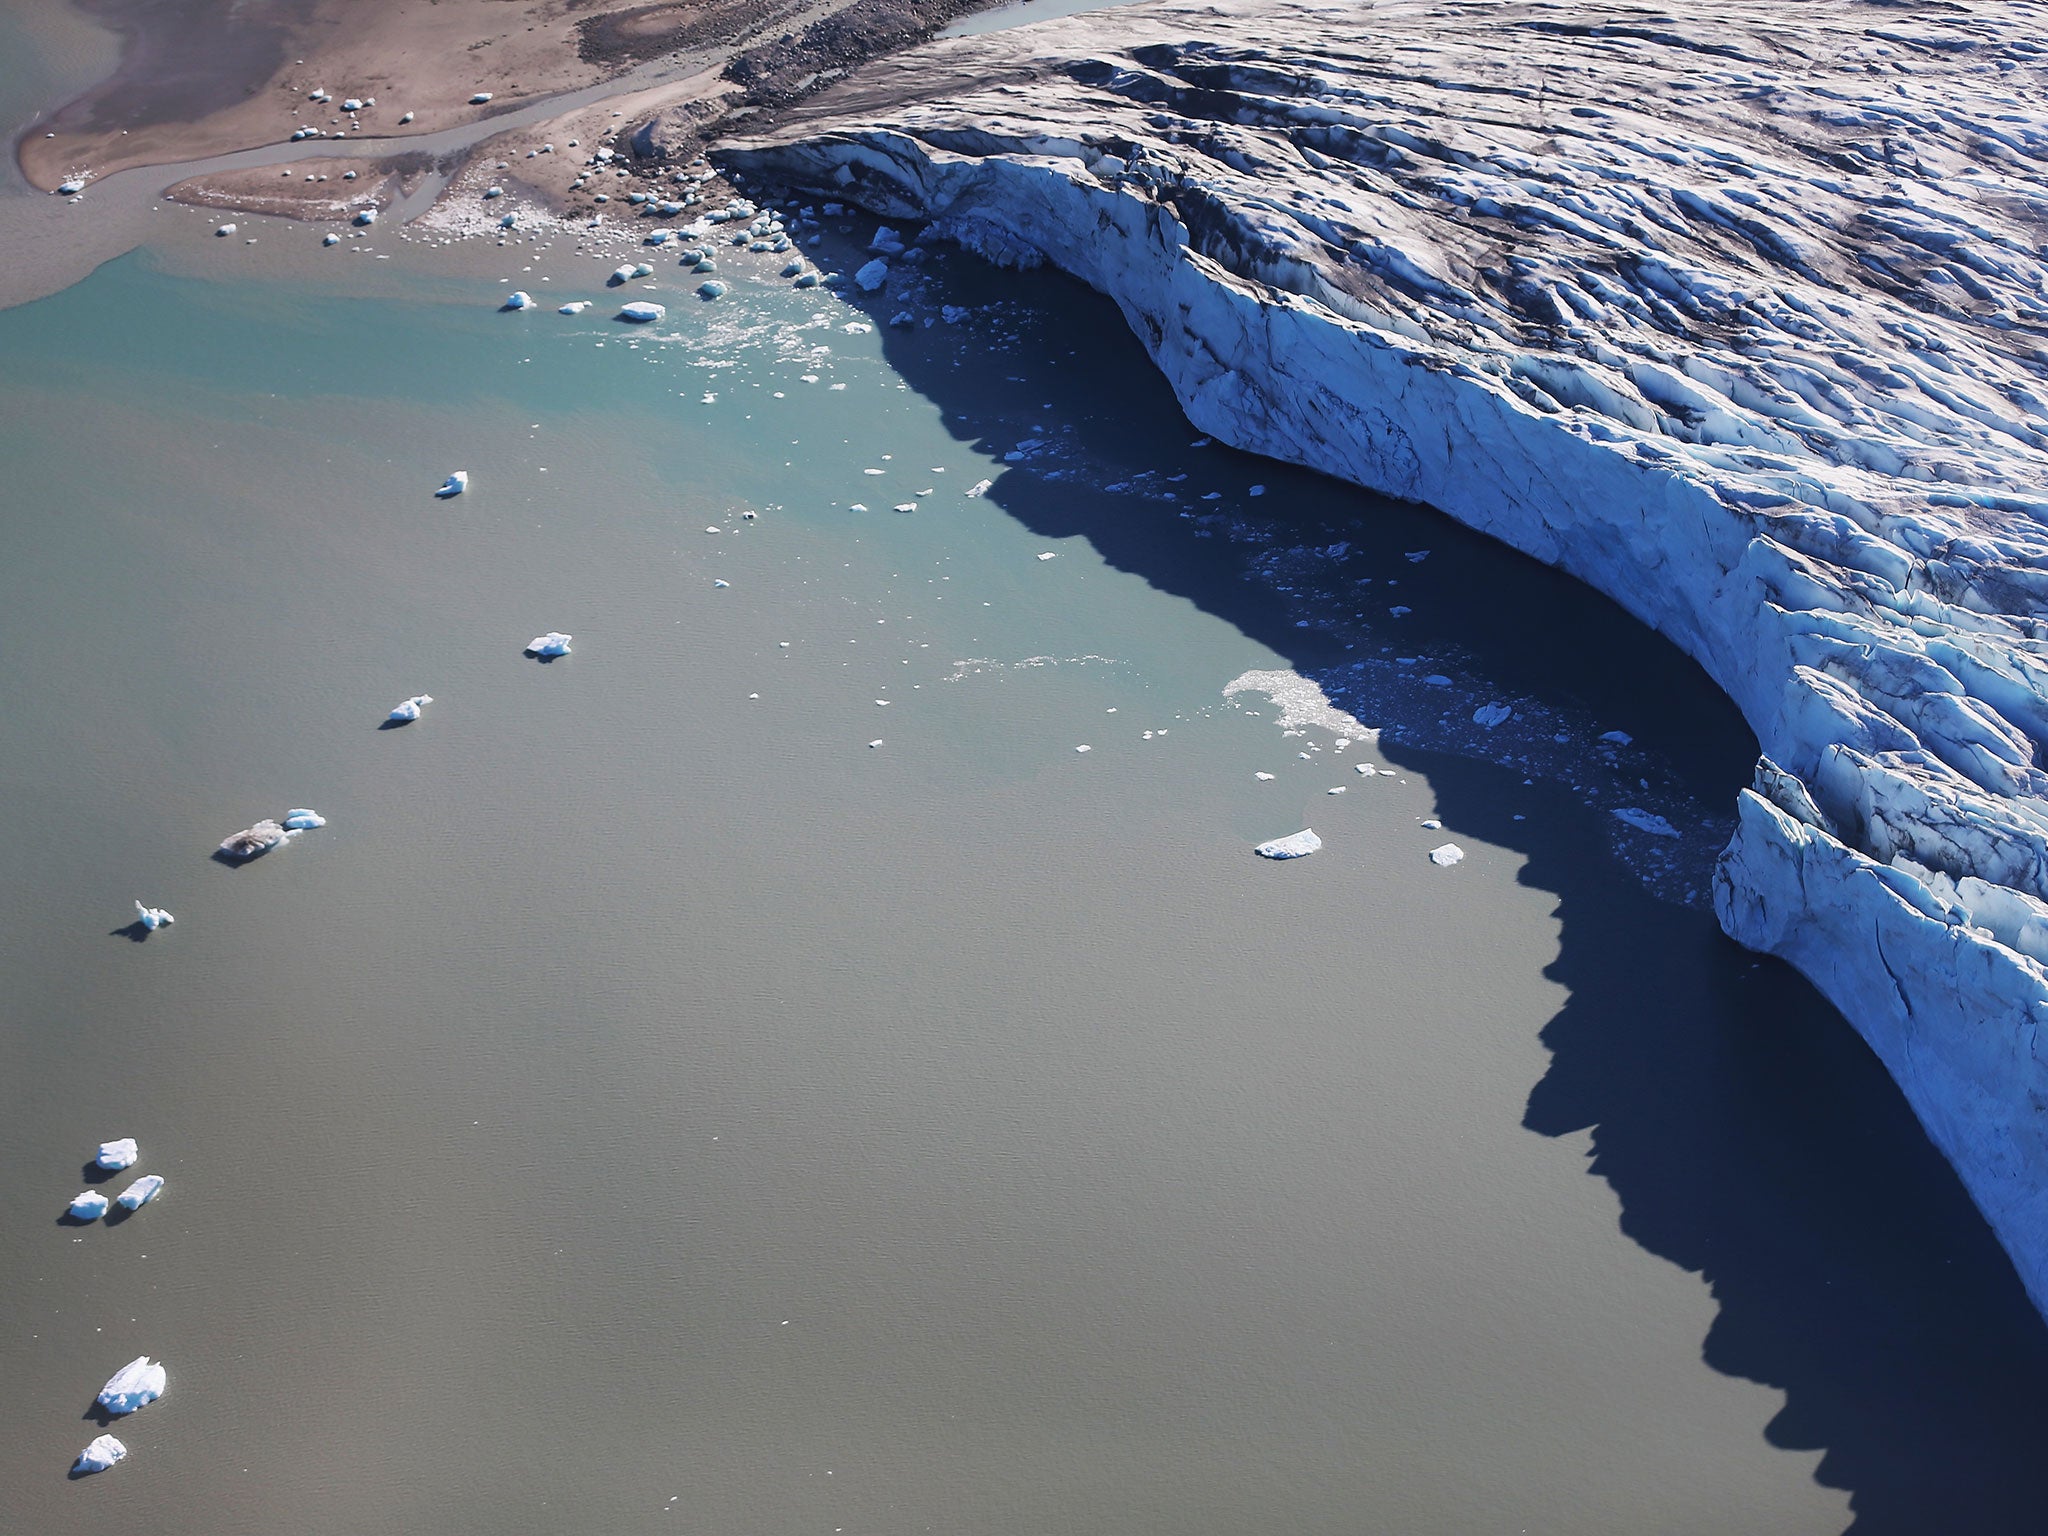 Research has found that two thirds of the current rate of glacial melting is due to human influences on the climate